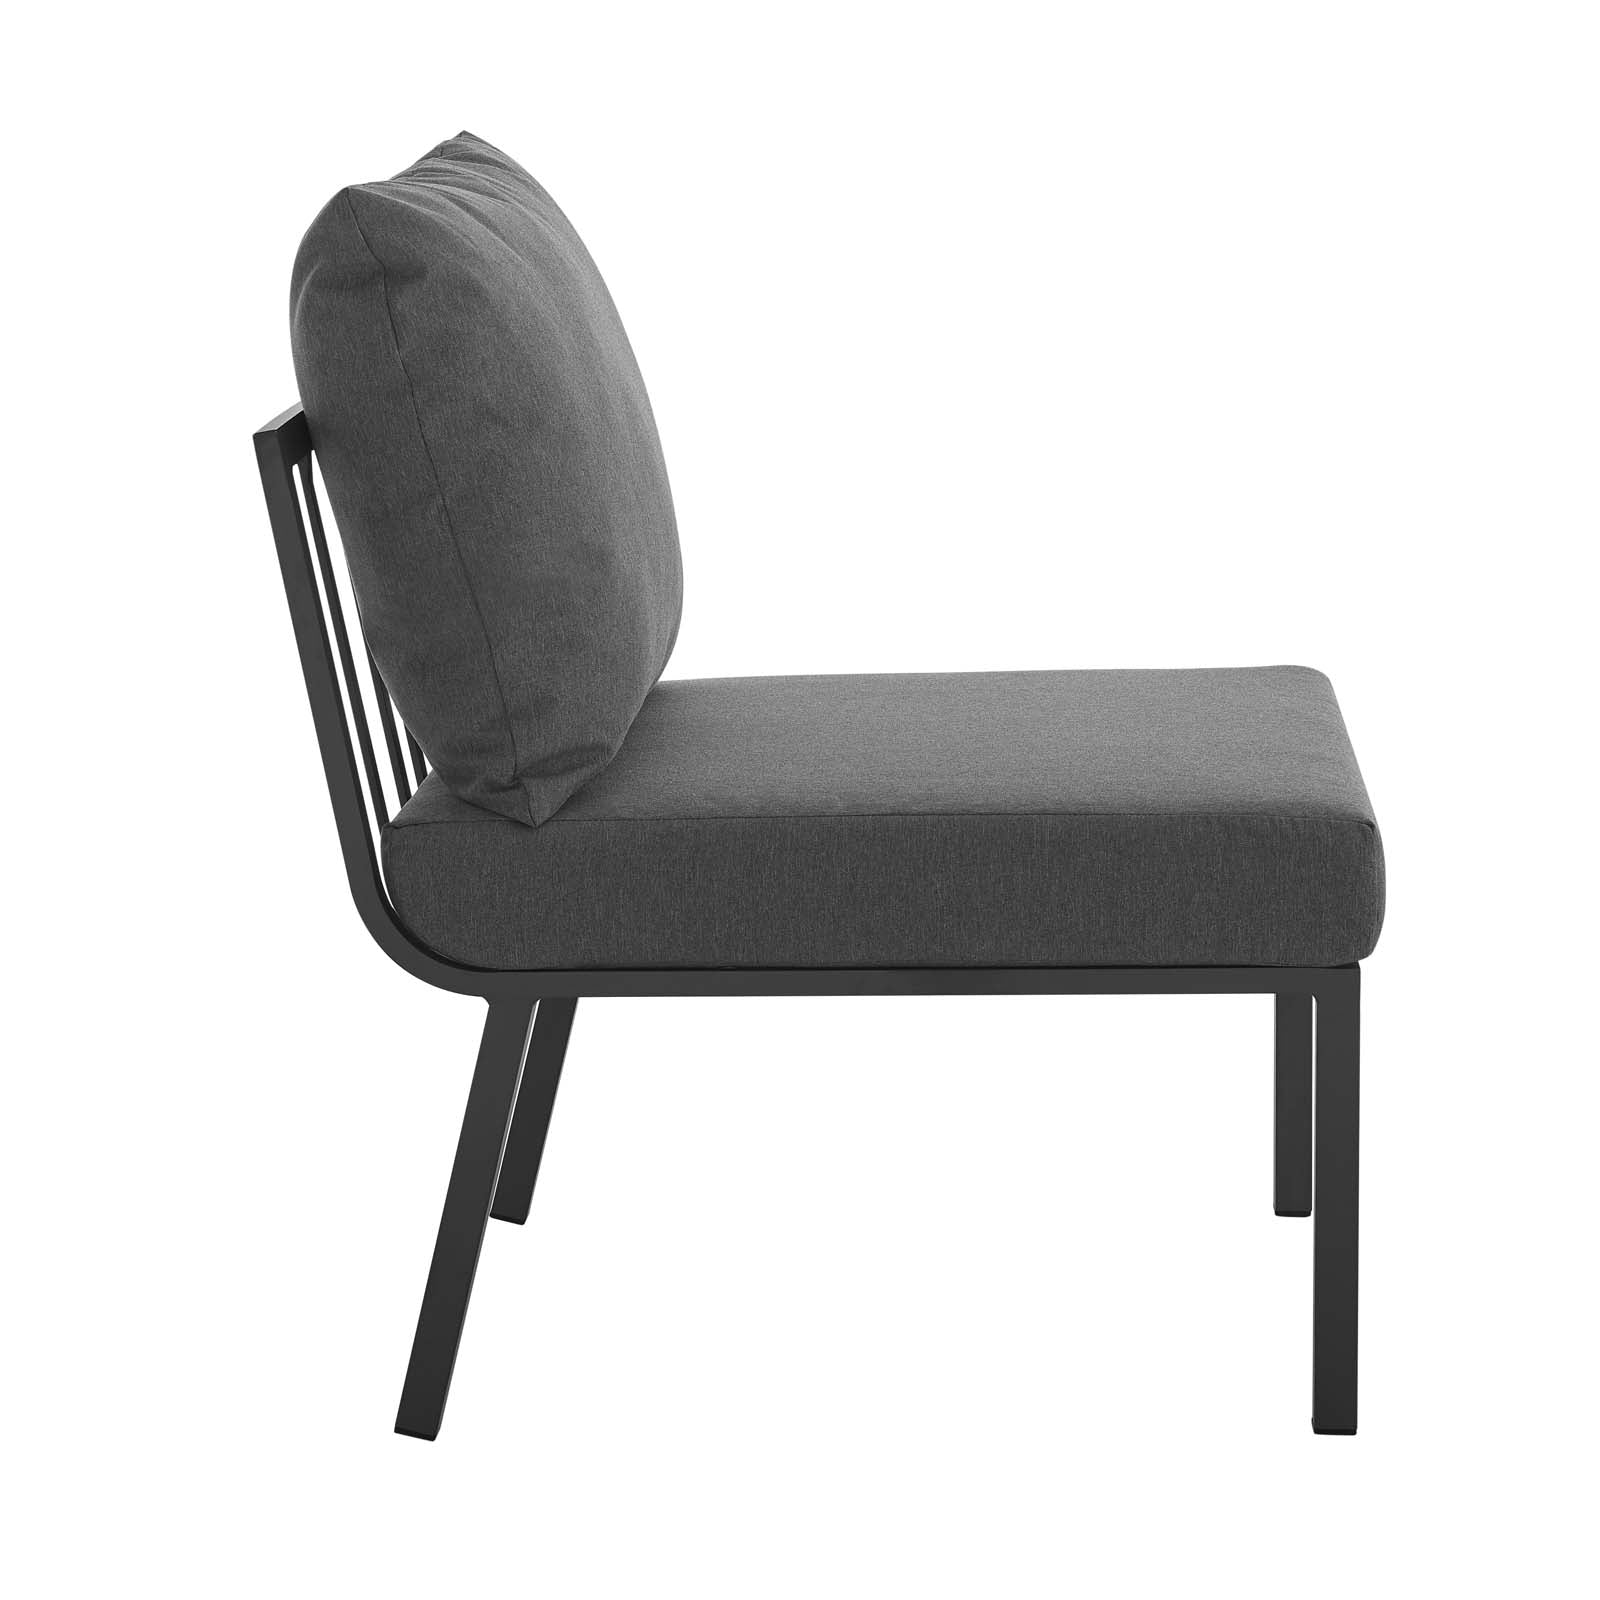 Modway Outdoor Chairs - Riverside Outdoor Patio Aluminum Armless Chair Gray Charcoal